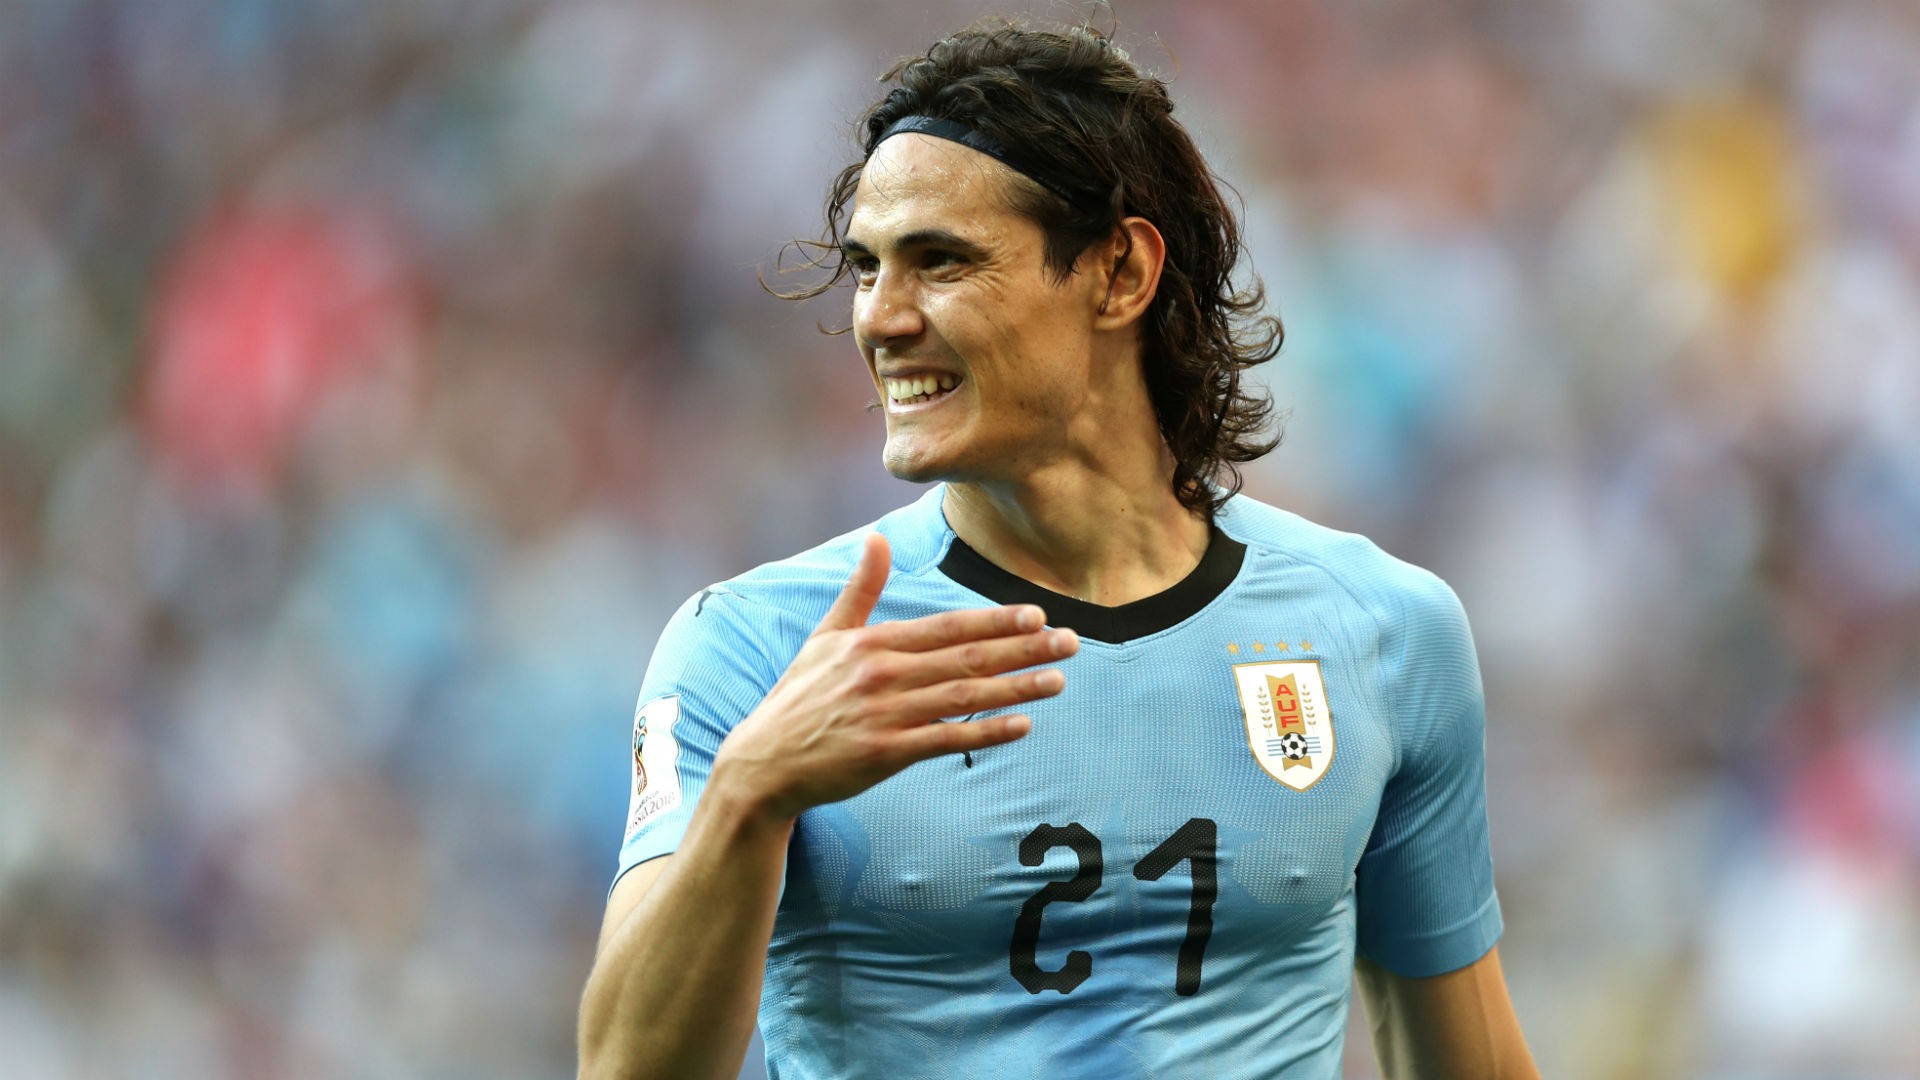 Edinson Cavani Uruguay Wallpaper HD With Resolution 1920X1080 pixel. You can make this wallpaper for your Desktop Computer Backgrounds, Mac Wallpapers, Android Lock screen or iPhone Screensavers